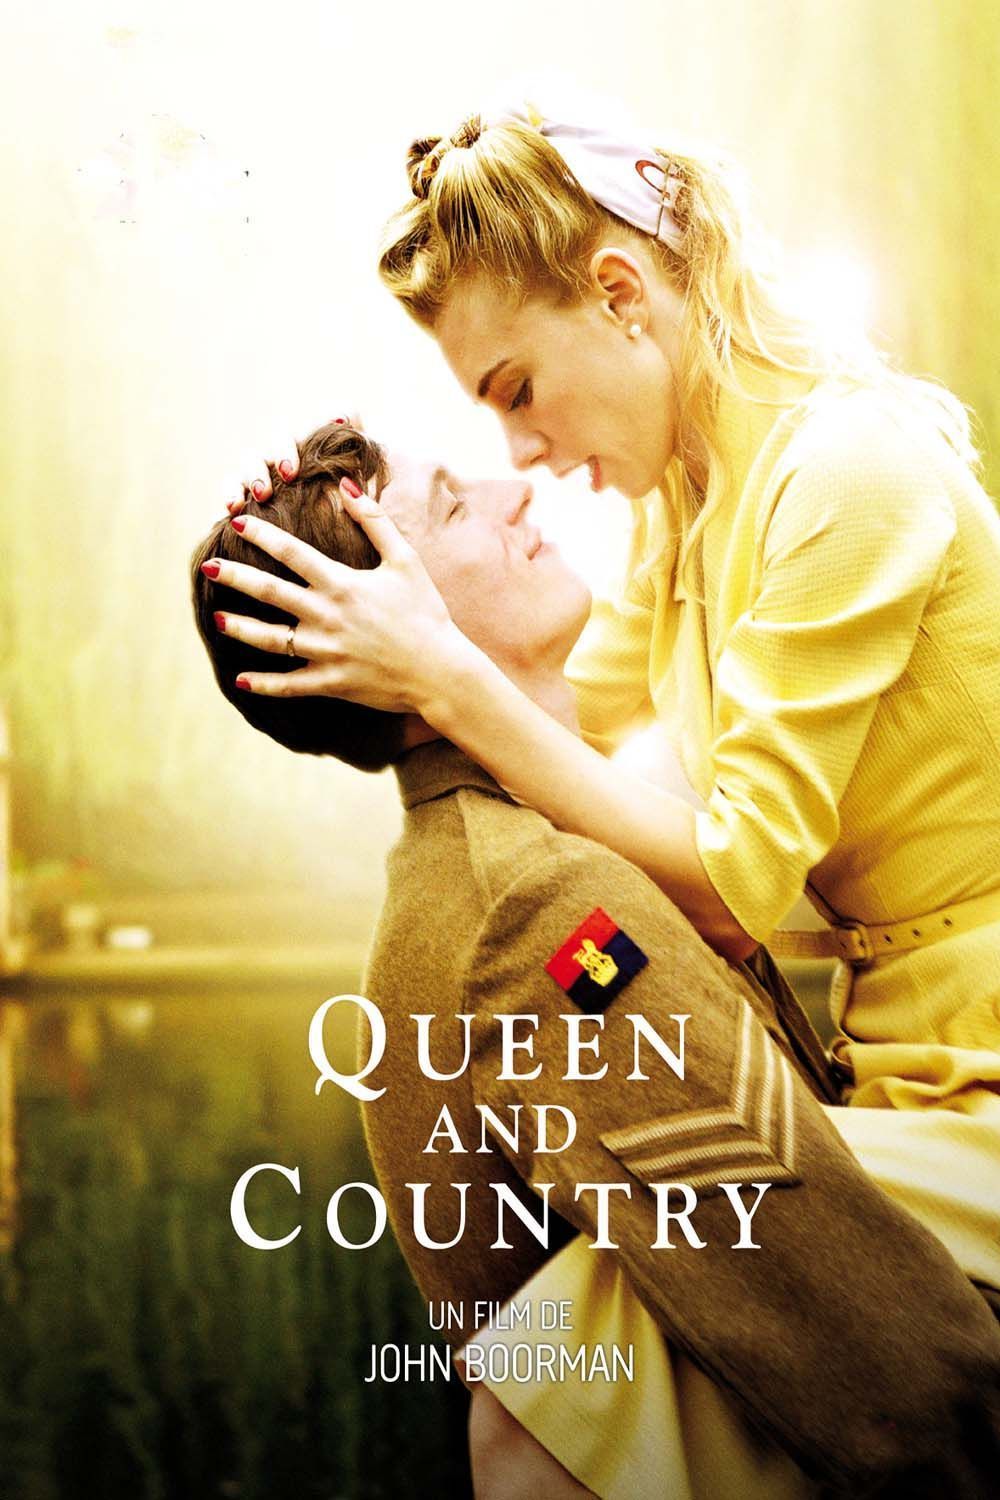 Queen and country